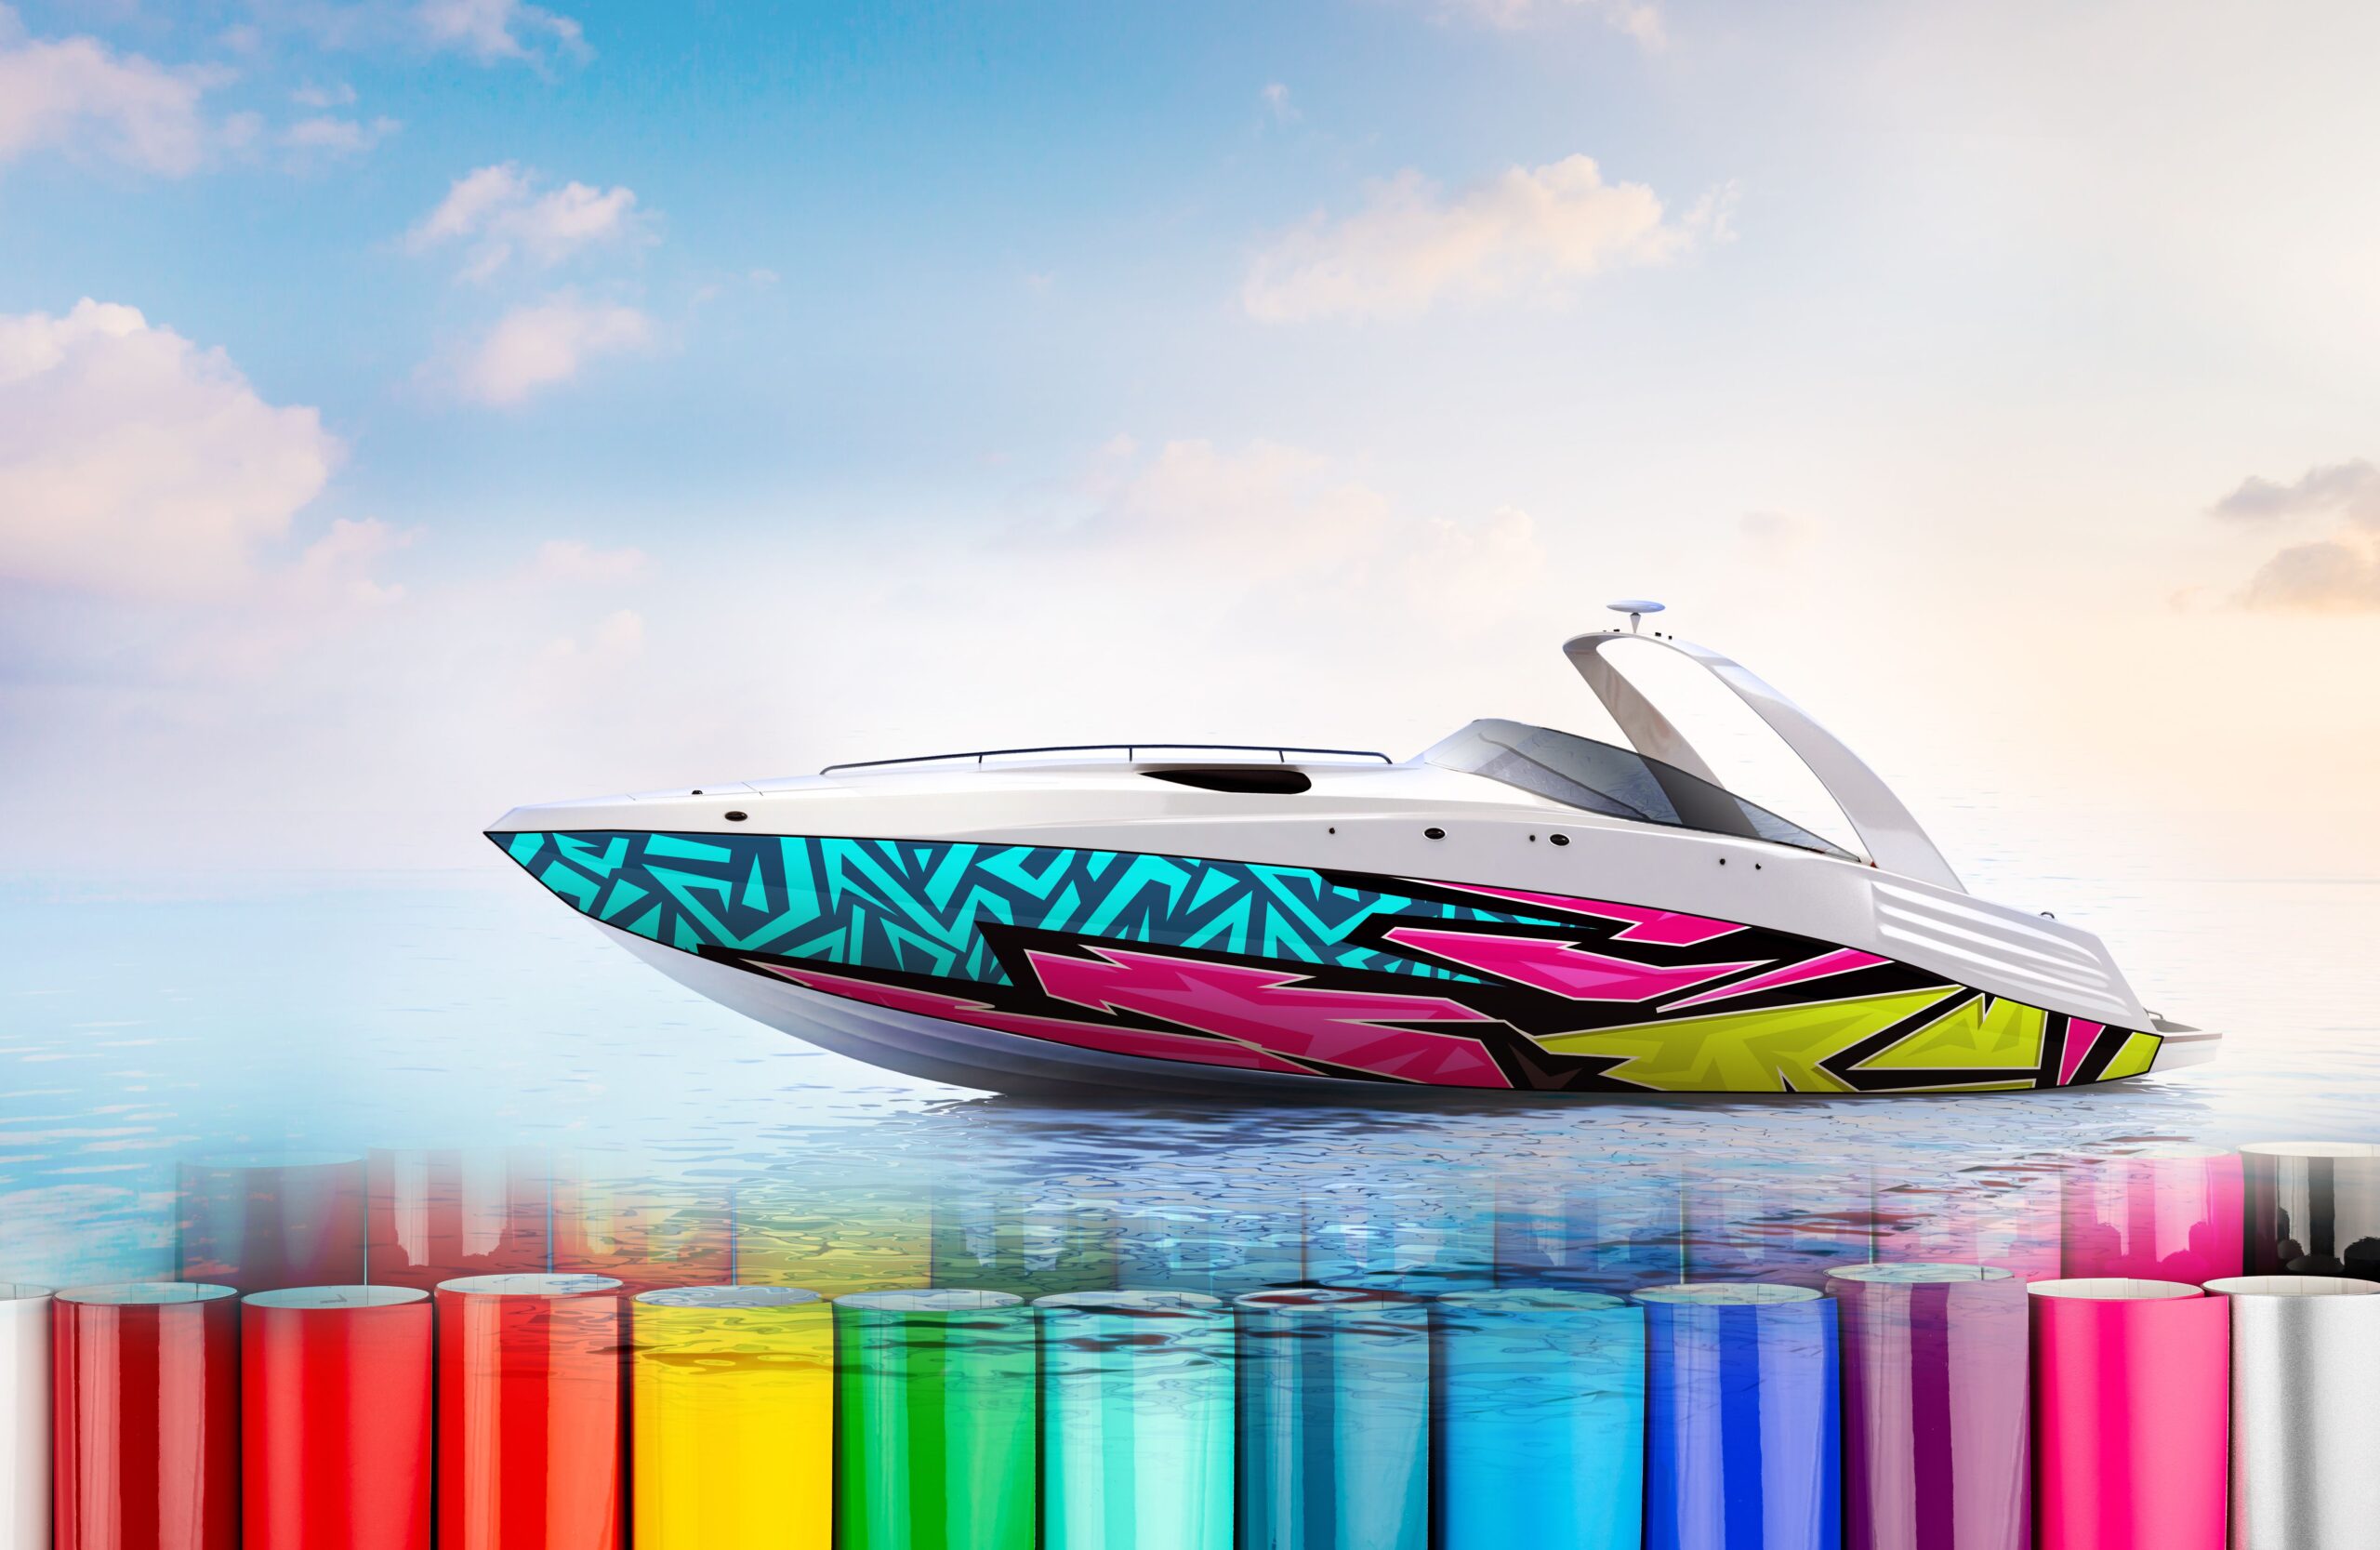 Multi-colored full vinyl boat wrap along with a variety of texture and colors that can be designed for a boat Multi-colored full vinyl boat wrap along with a variety of texture and colors that can be designed for a boat. Multi-colored boat wrap materials used for a multi-colored boat wrap designed by Wraps Direct located in Jacksonville, FL